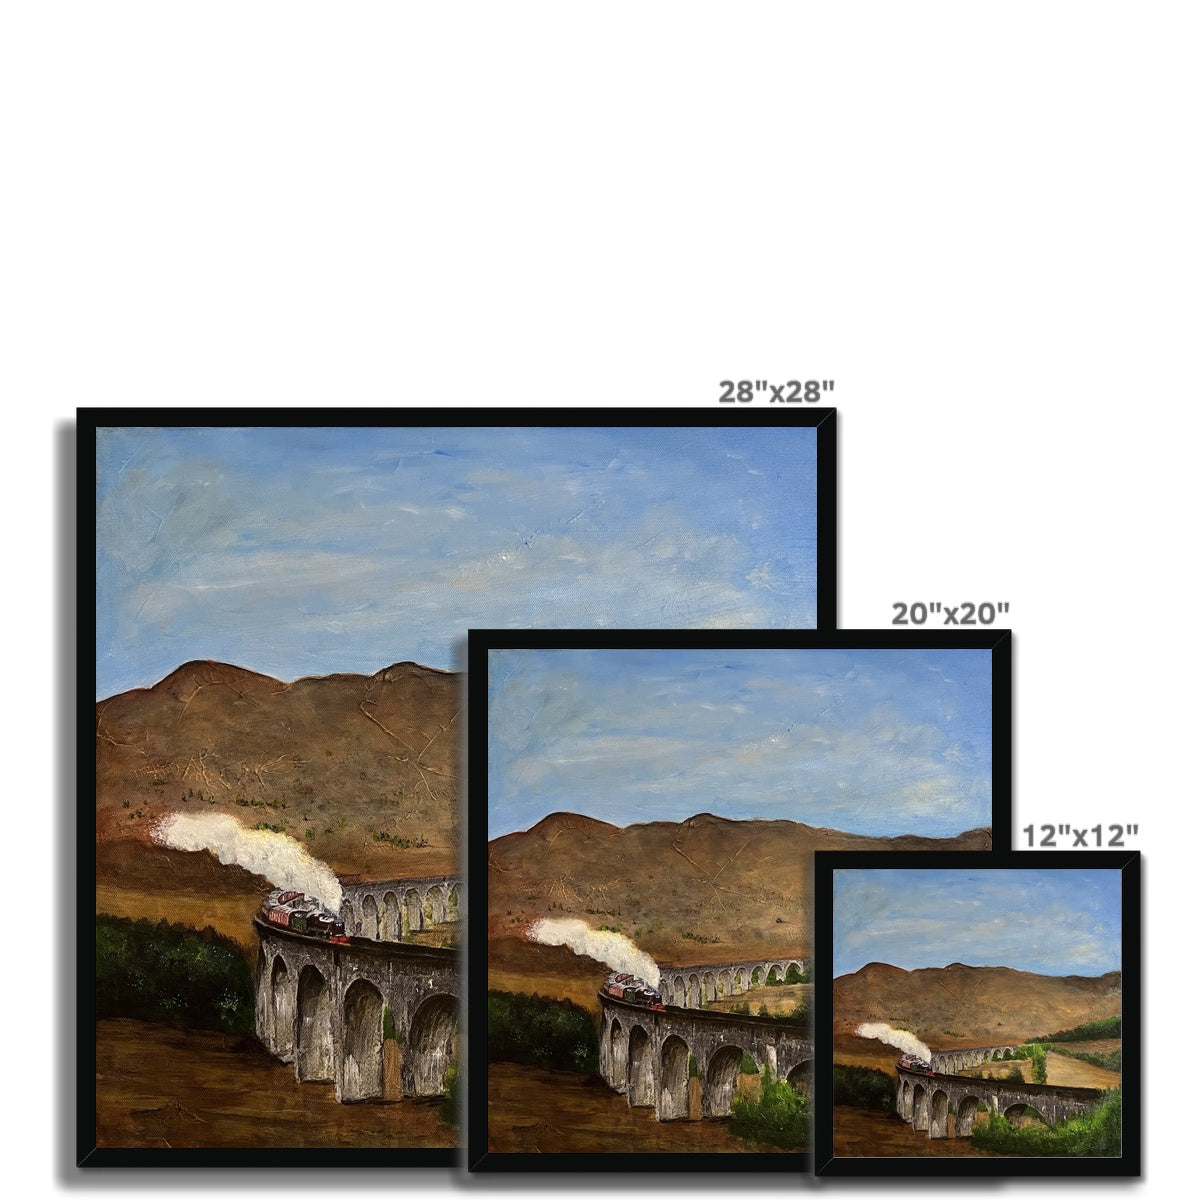 Glenfinnan Viaduct Painting | Framed Prints From Scotland-Framed Prints-Scottish Highlands & Lowlands Art Gallery-Paintings, Prints, Homeware, Art Gifts From Scotland By Scottish Artist Kevin Hunter